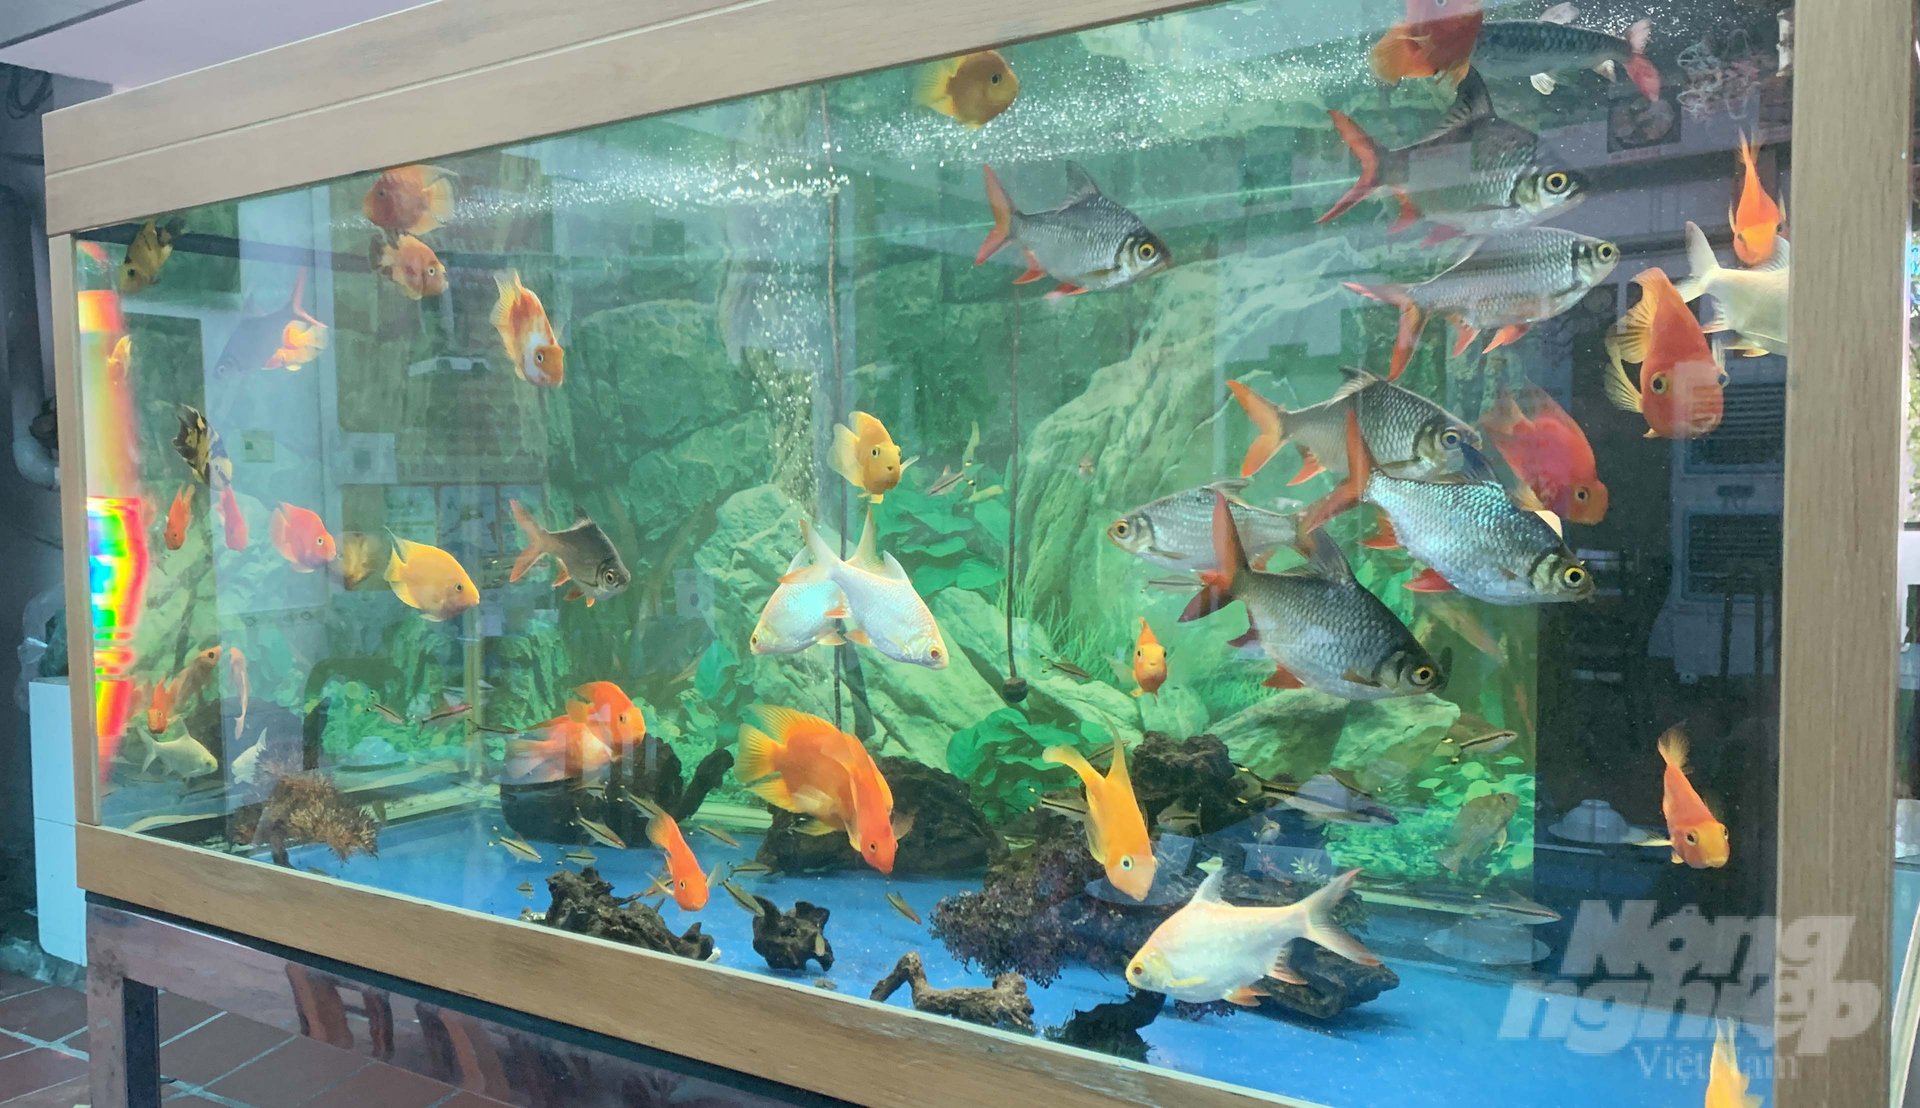 The hobby of keeping aquarium fish seems to have become a culture and is indispensable in every house of Southern people. Photo: Le Binh.